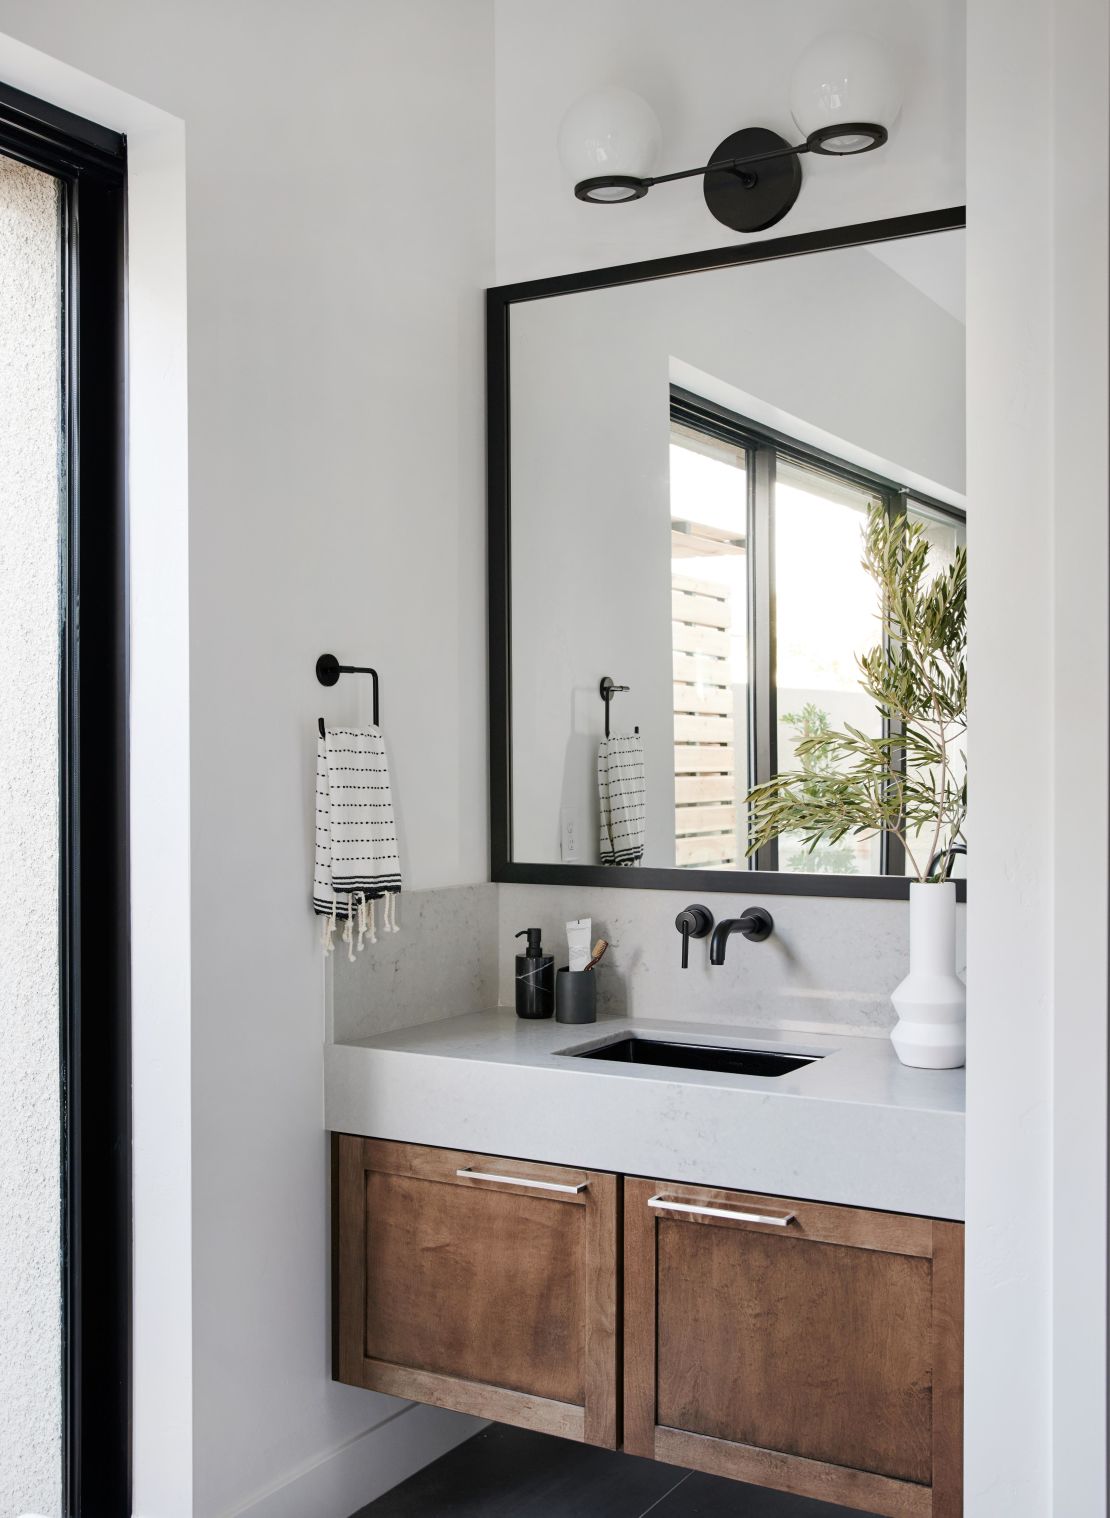 "The organization of the bathroom is often really overlooked," says Berk. "I think it has the biggest opportunity to cause the stress and annoyance in your life than any other space in your house."